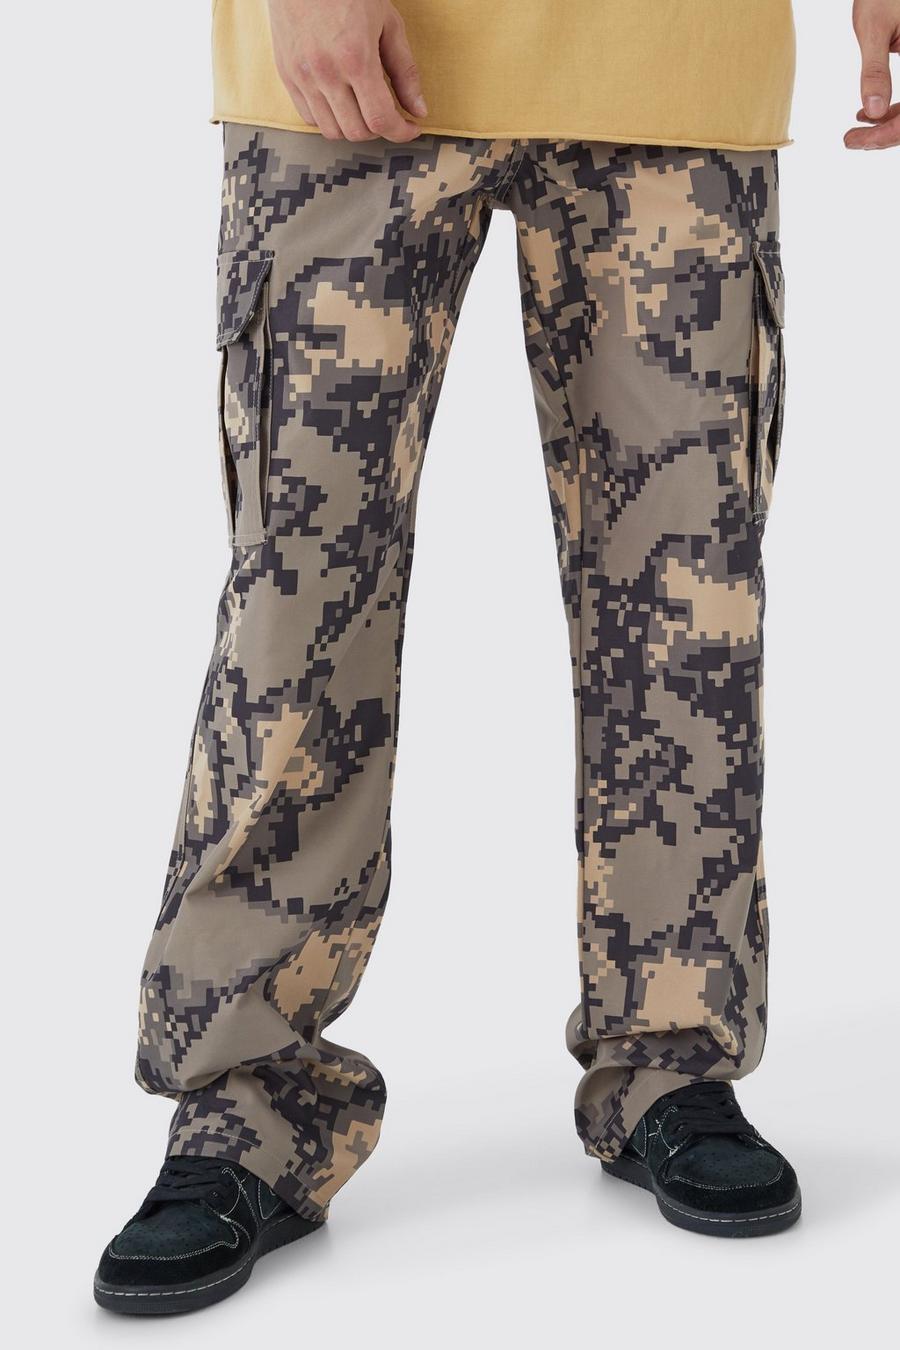 Stone Tall Relaxed Pixelated Camo Cargo Trouser